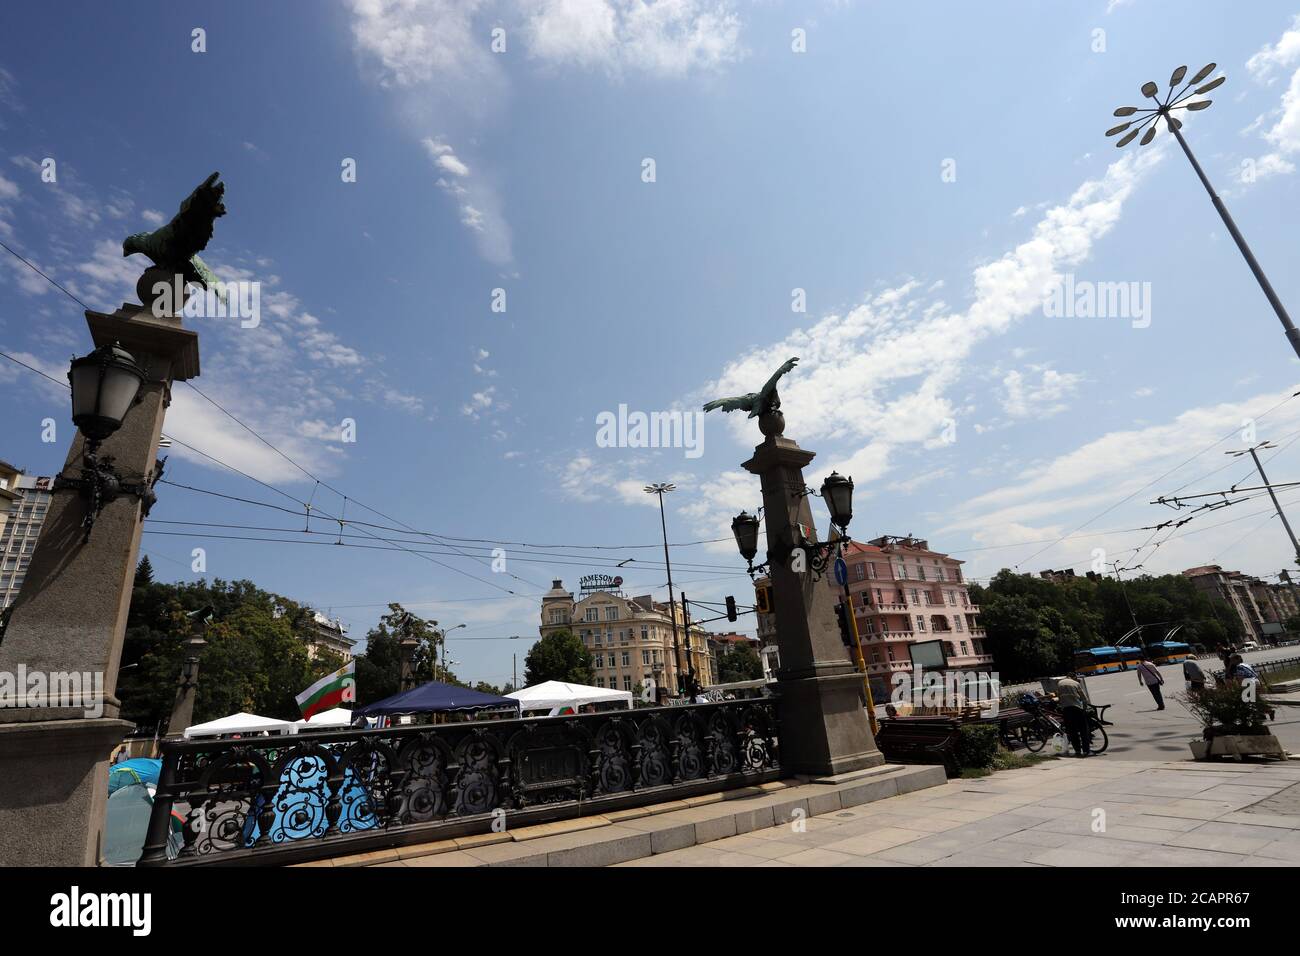 The 31st day of the protest against the government and the chief prosecutor set up barricades on Orlov most (Eagle Bridge) in Sofia, Bulgaria on 08/08 Stock Photo